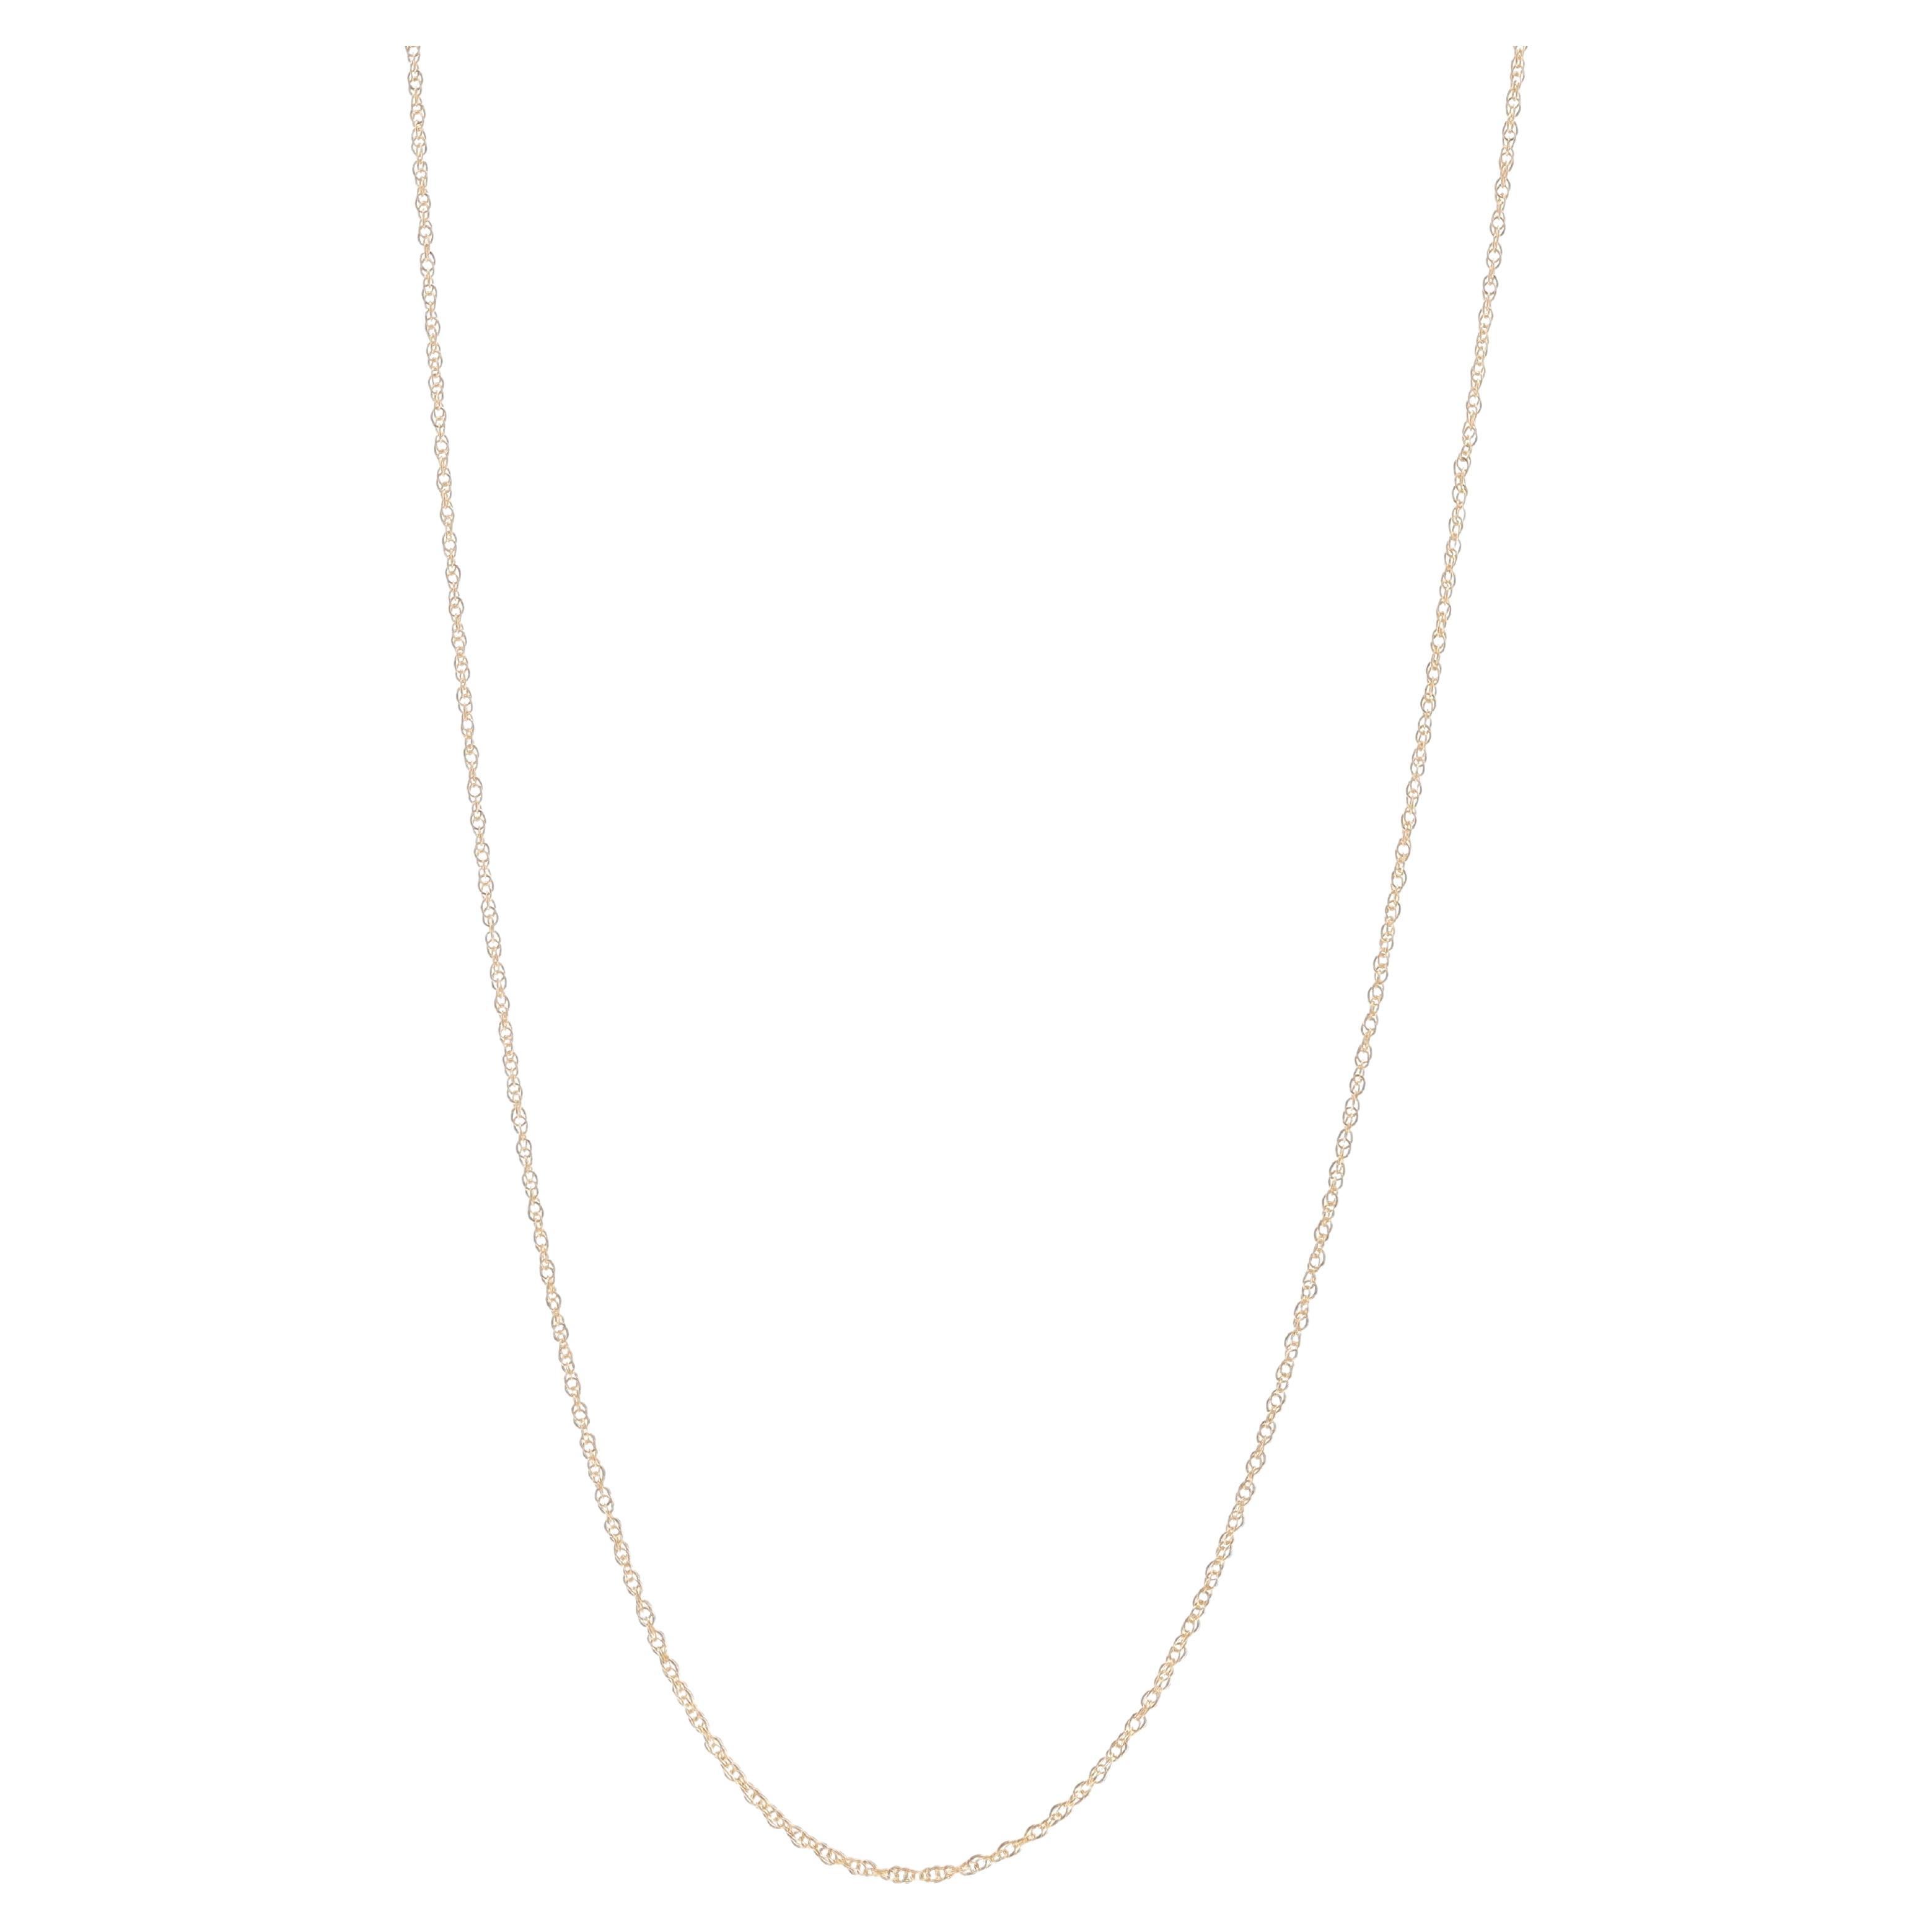 Yellow Gold Prince of Wales Chain Necklace 23 3/4" - 14k